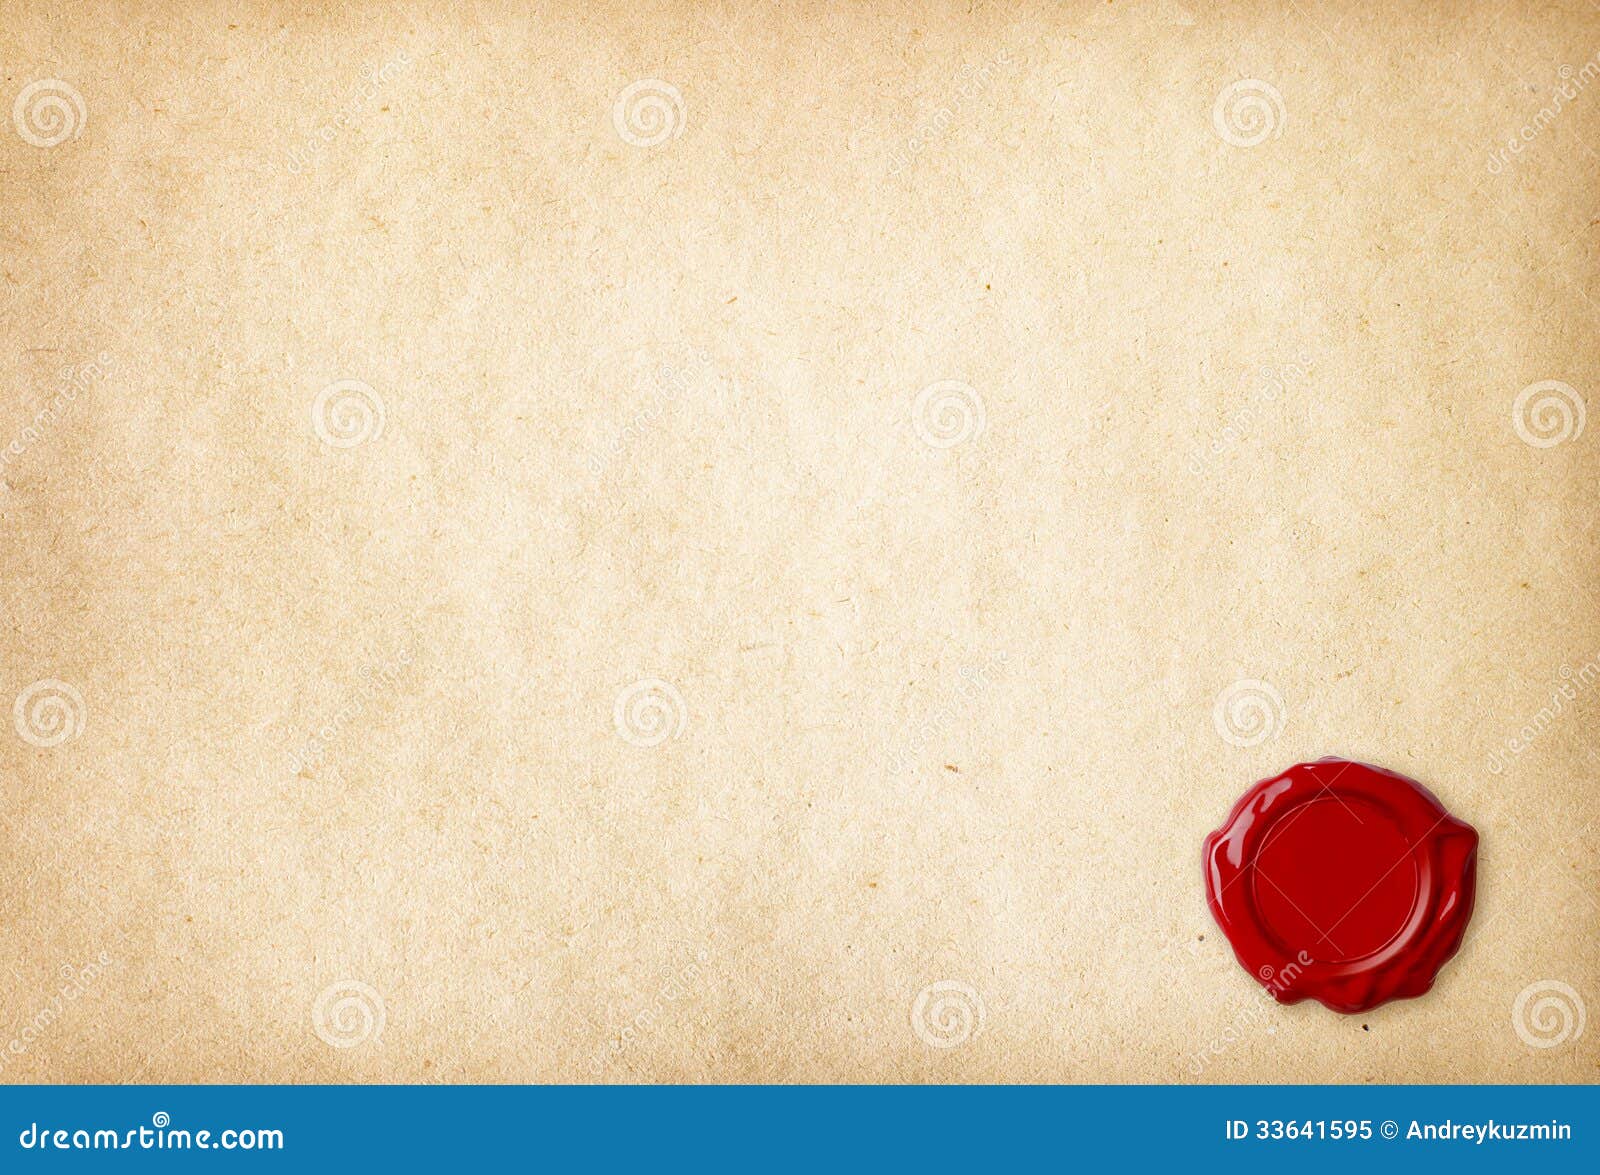 Old Blank Paper With Red Wax Seal Royalty Free Stock Photo 